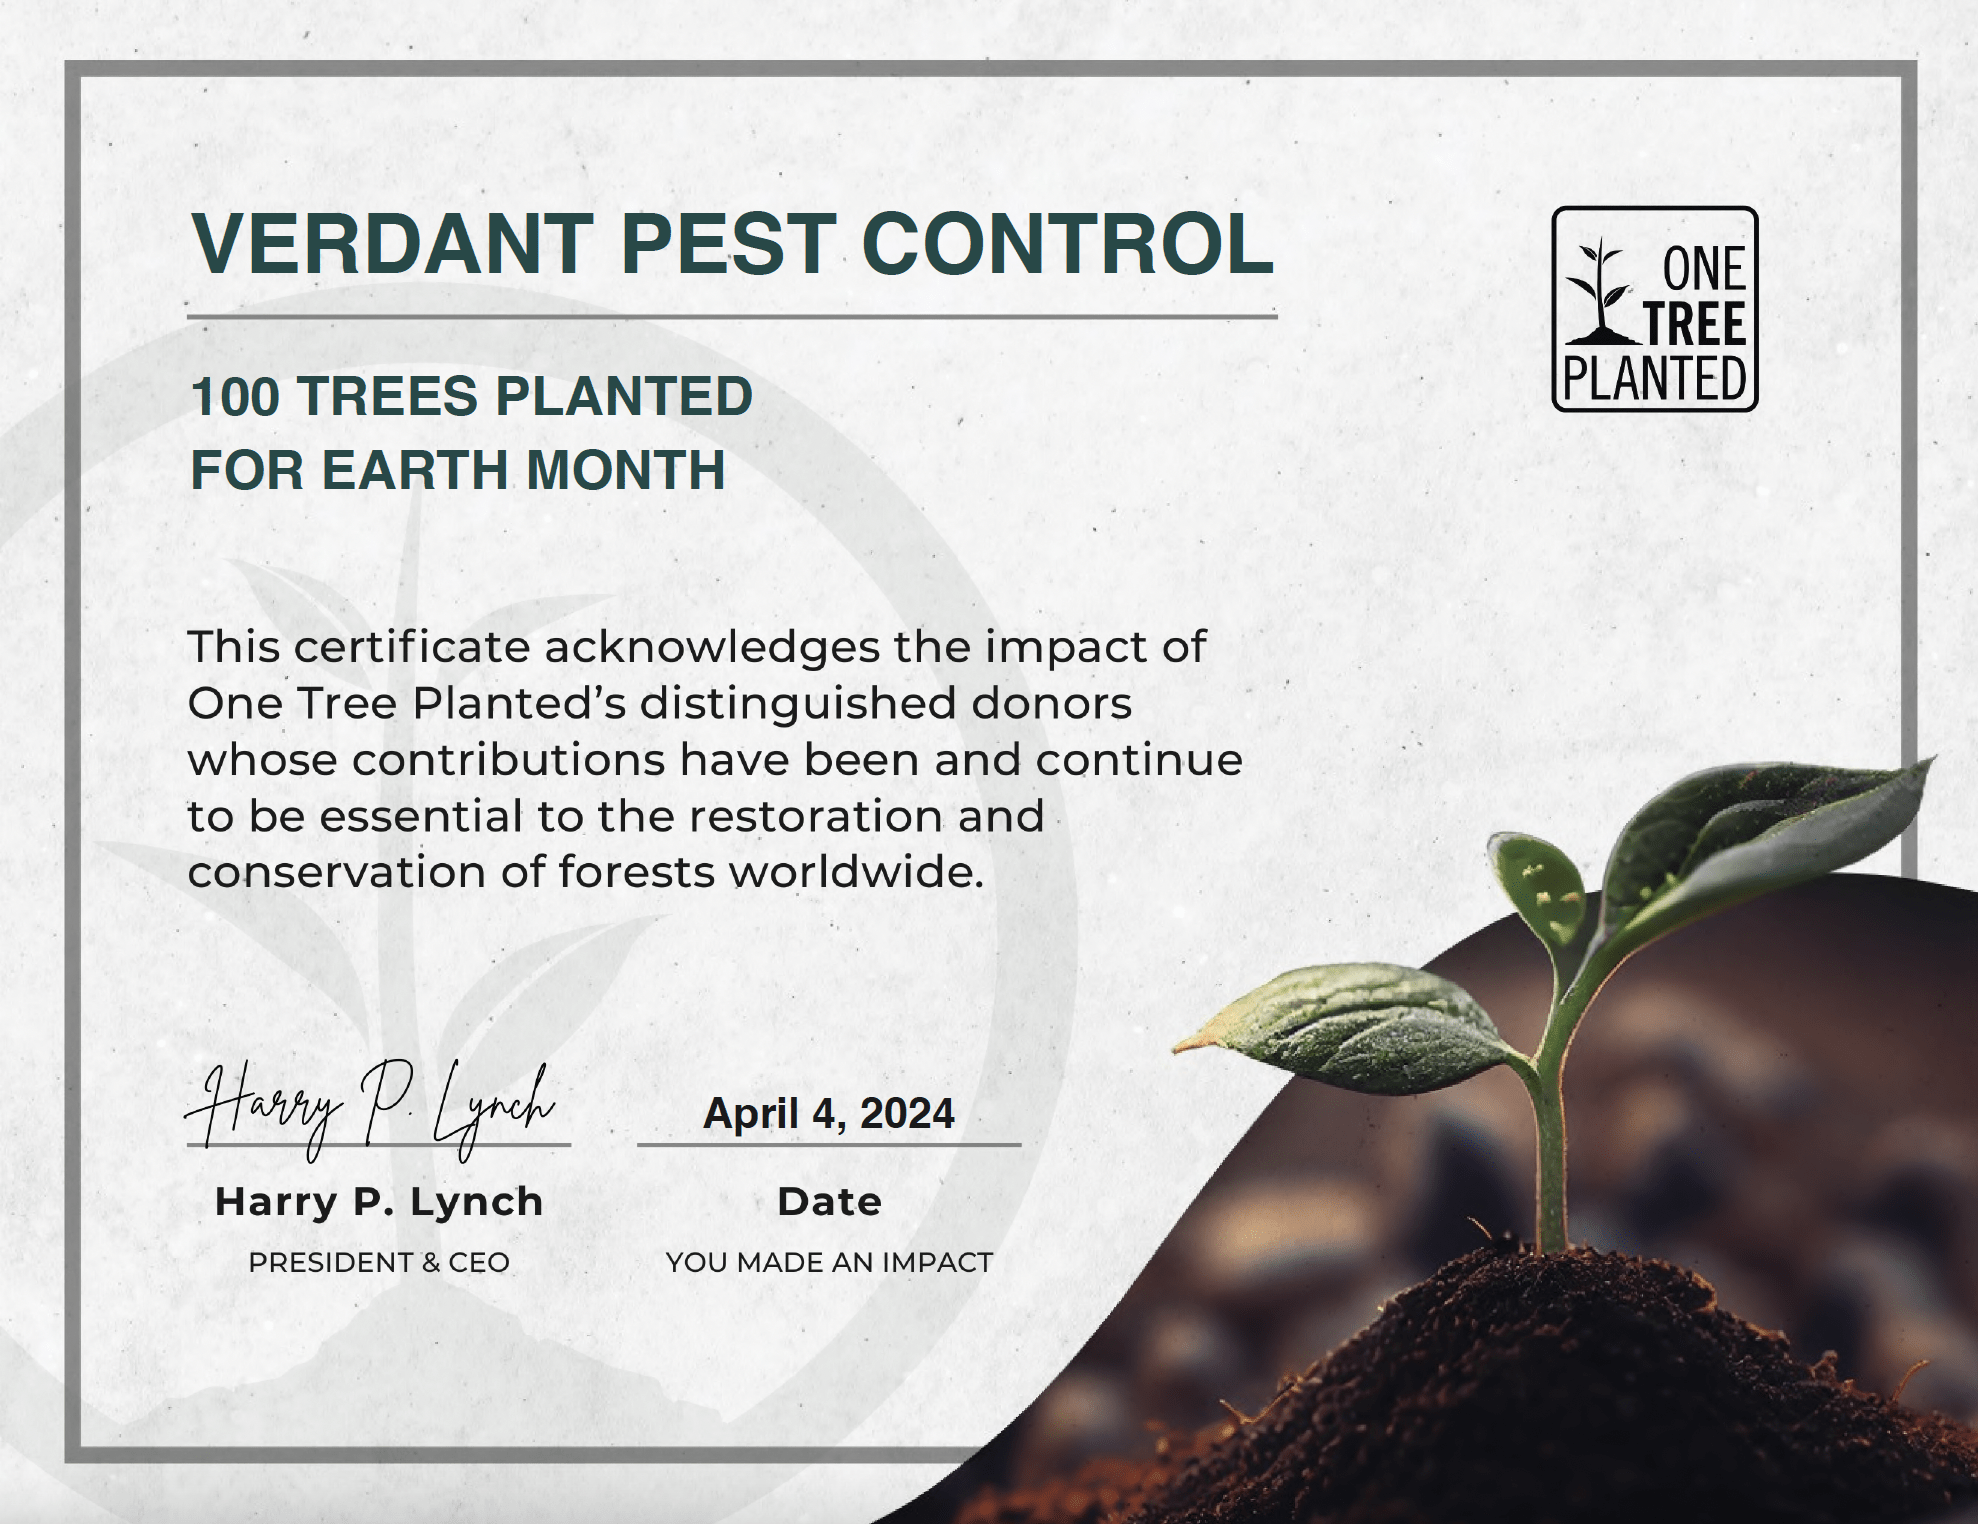 Verdant Pest Control plants one tree with every service completed!